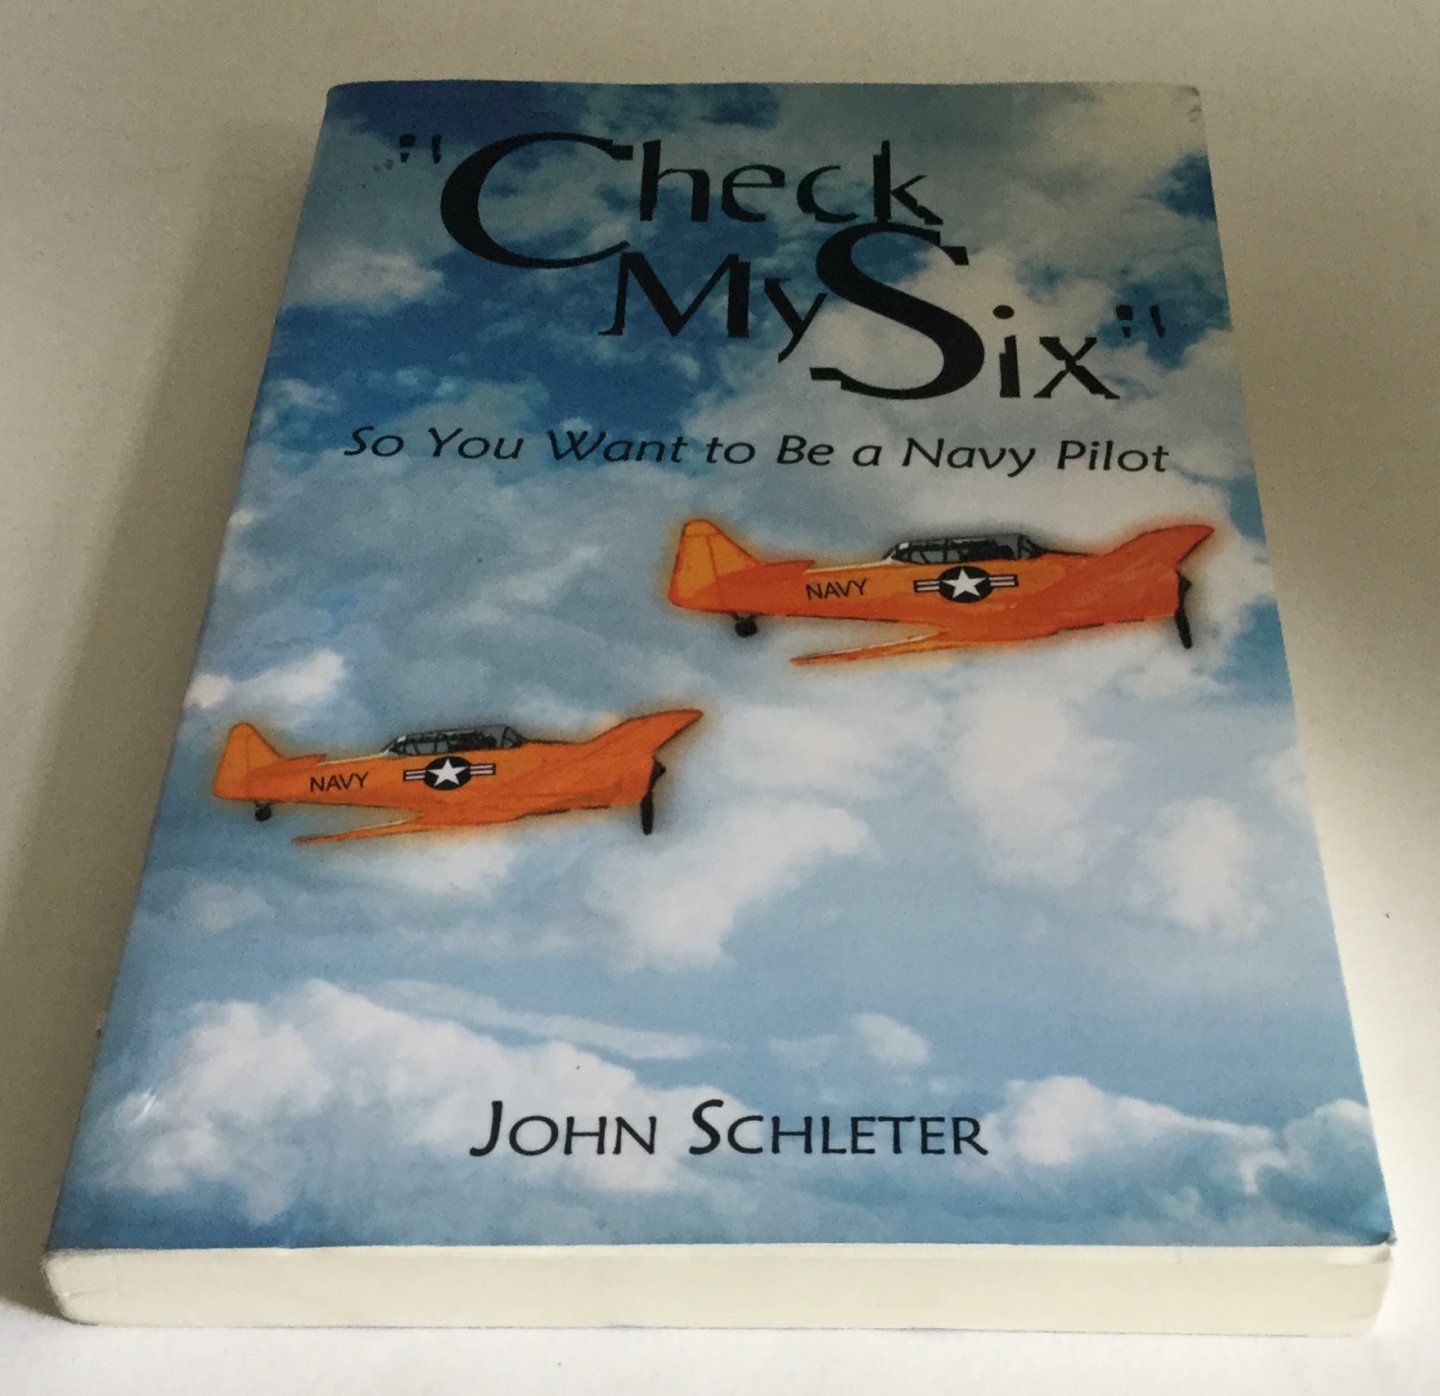 Schleter, John - Check My Six: So You Want to Be a Navy Pilot